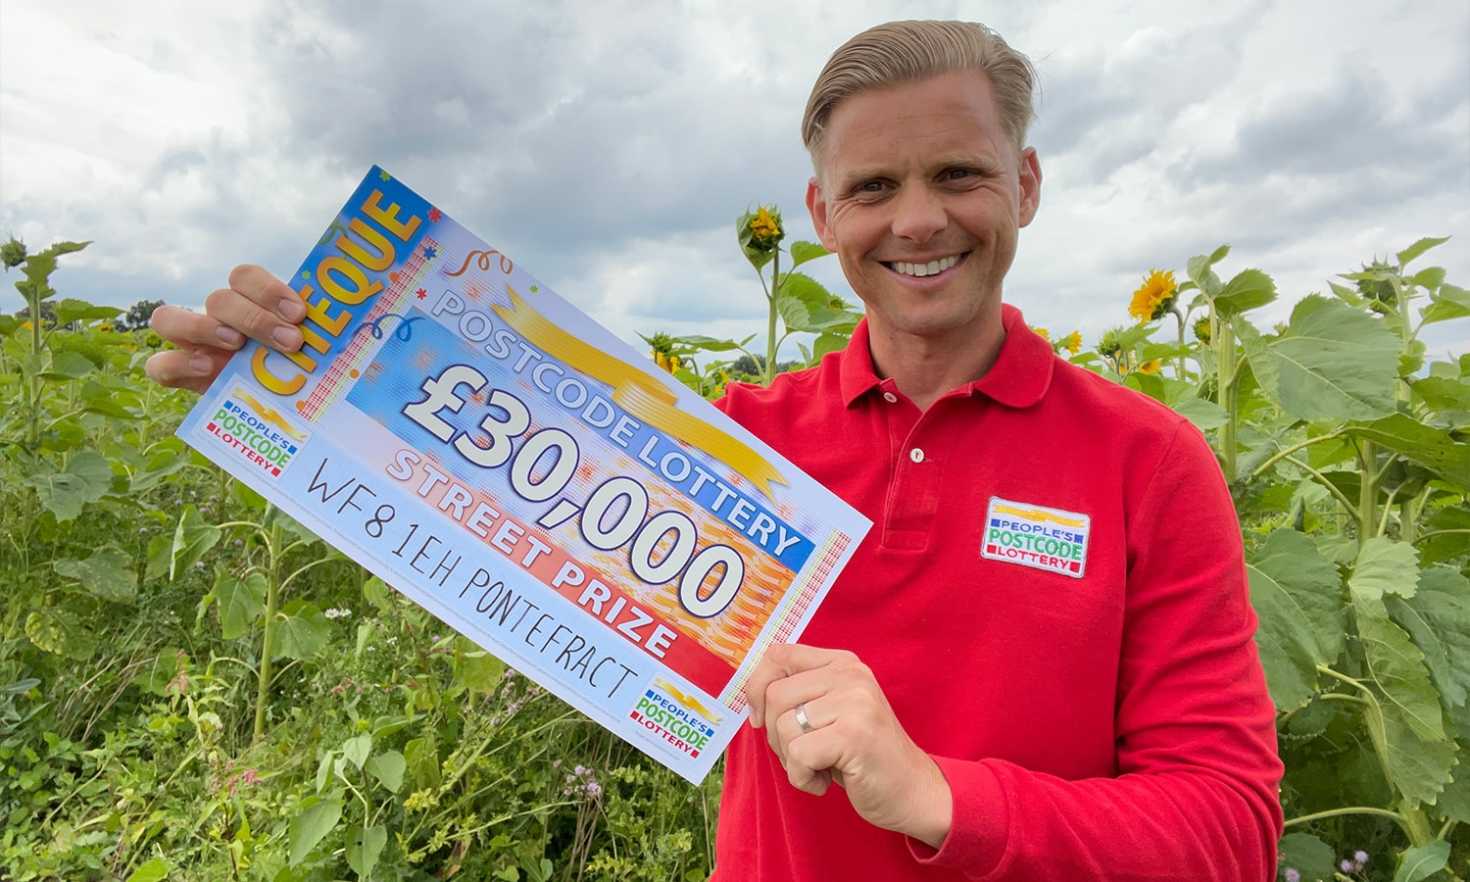 Jeff has a lovely £30,000 cheque for one lucky winner in today's Street Prize